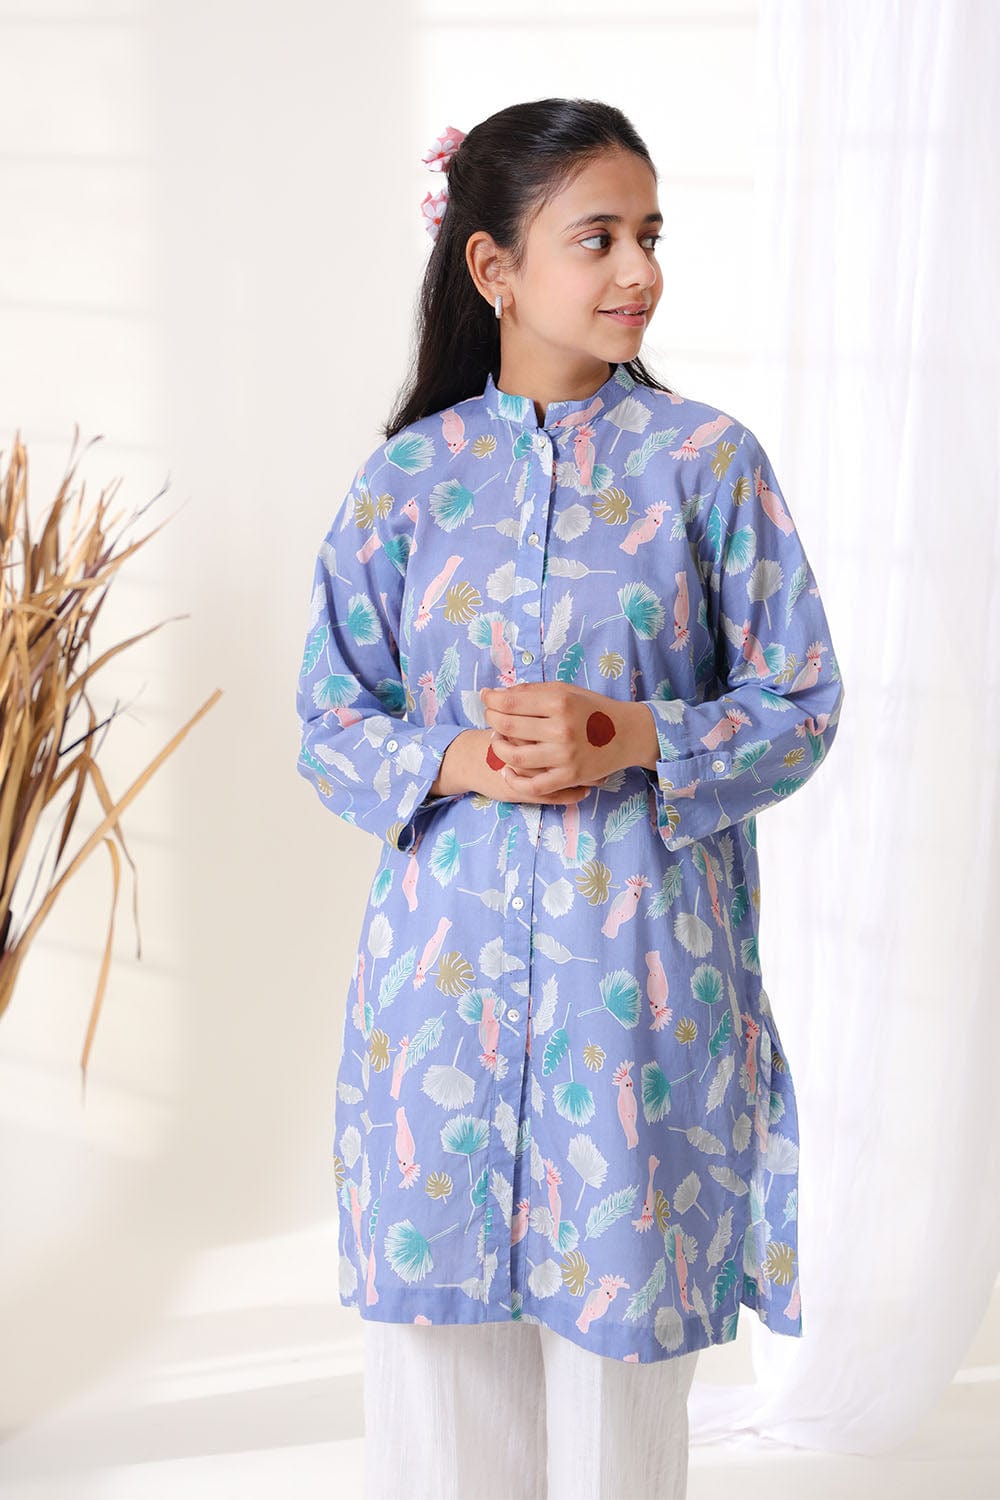 Hope Not Out by Shahid Afridi Eastern Girls Tops Girls Blue Multi Color Top Flora